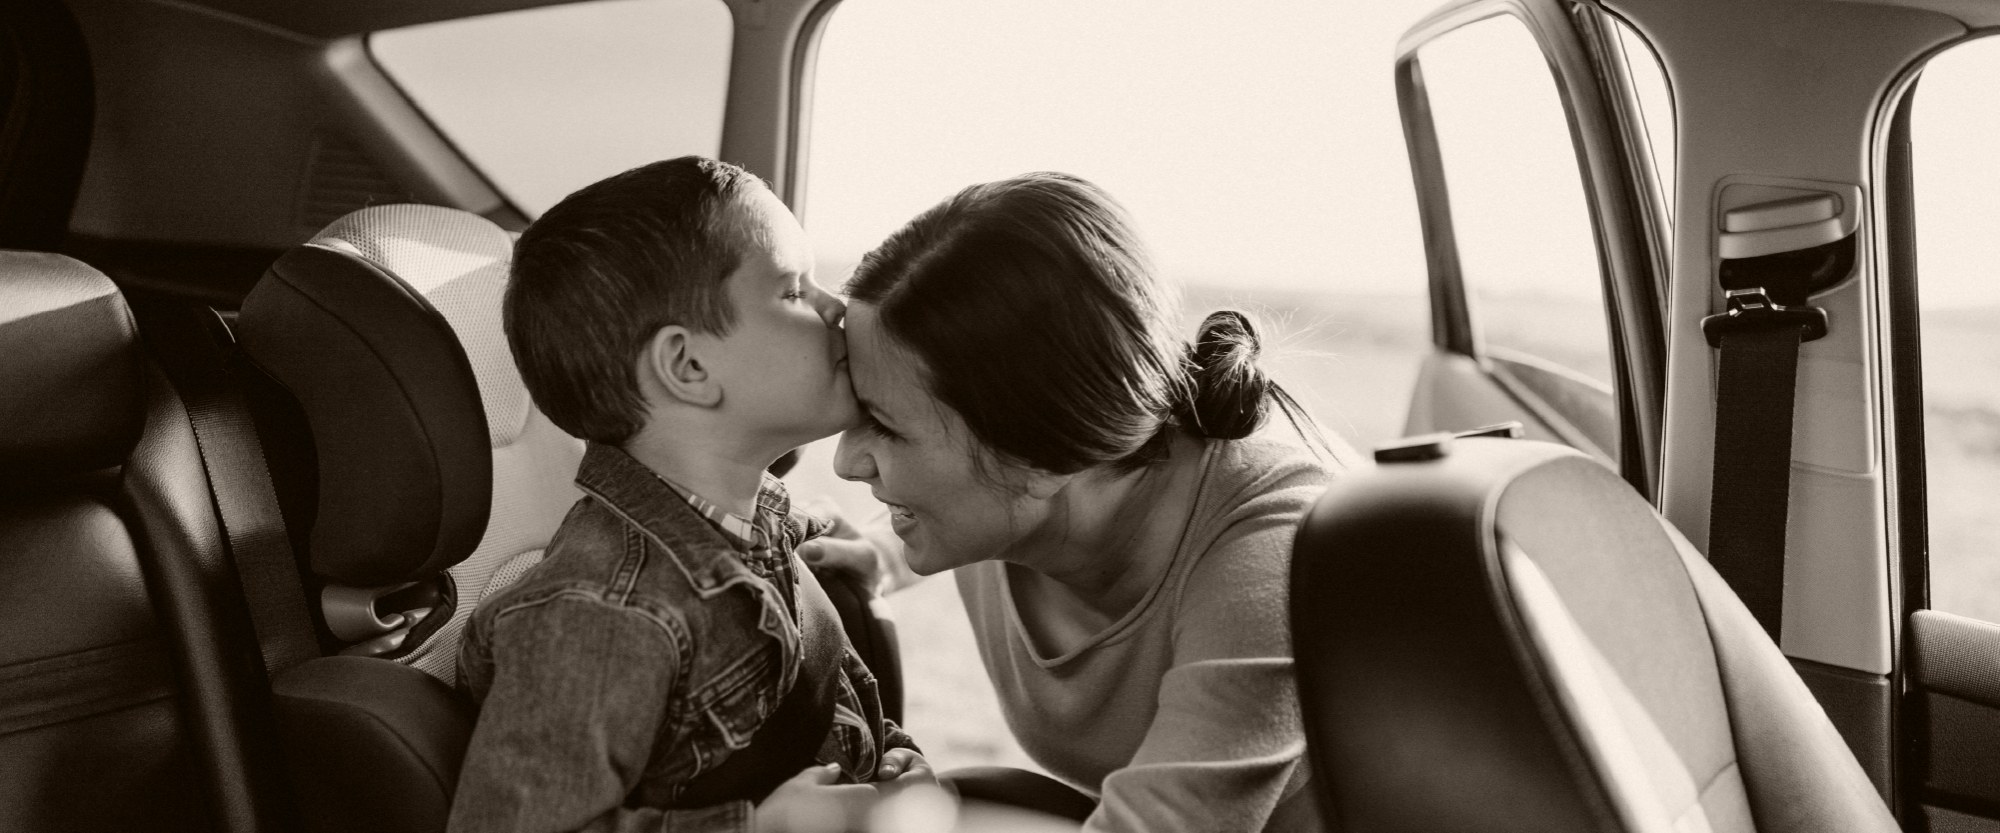 Photo of kid kissing mom after being buckled into car seat in back